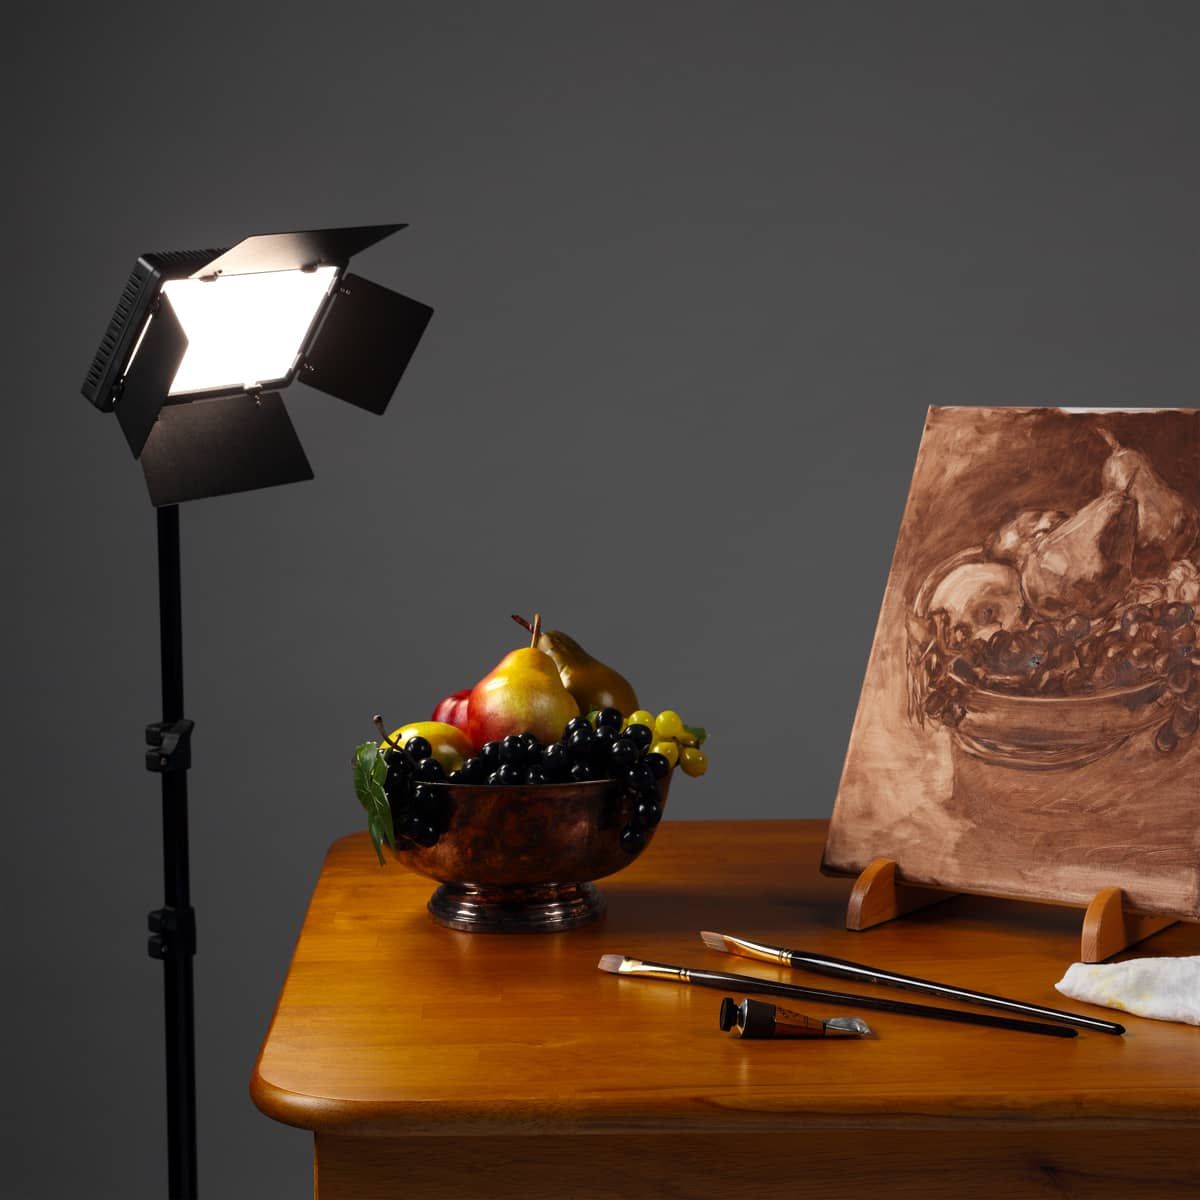 ColorView LUX artist studio light in use